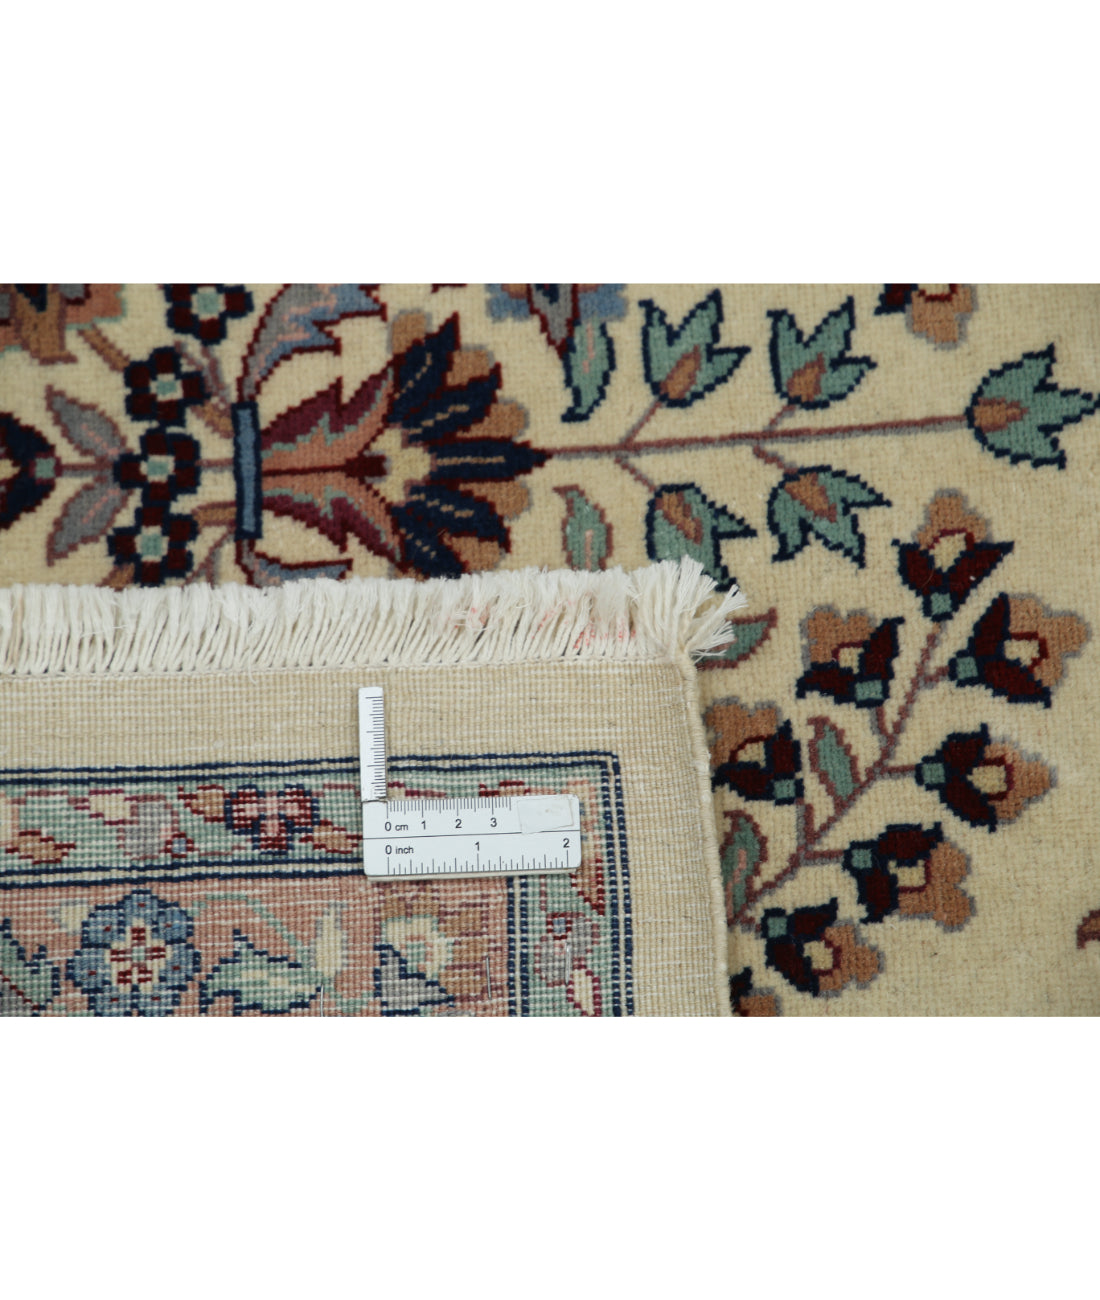 Heritage 9' 2" X 11' 7" Hand-Knotted Wool Rug 9' 2" X 11' 7" (279 X 353) / Ivory / Blue